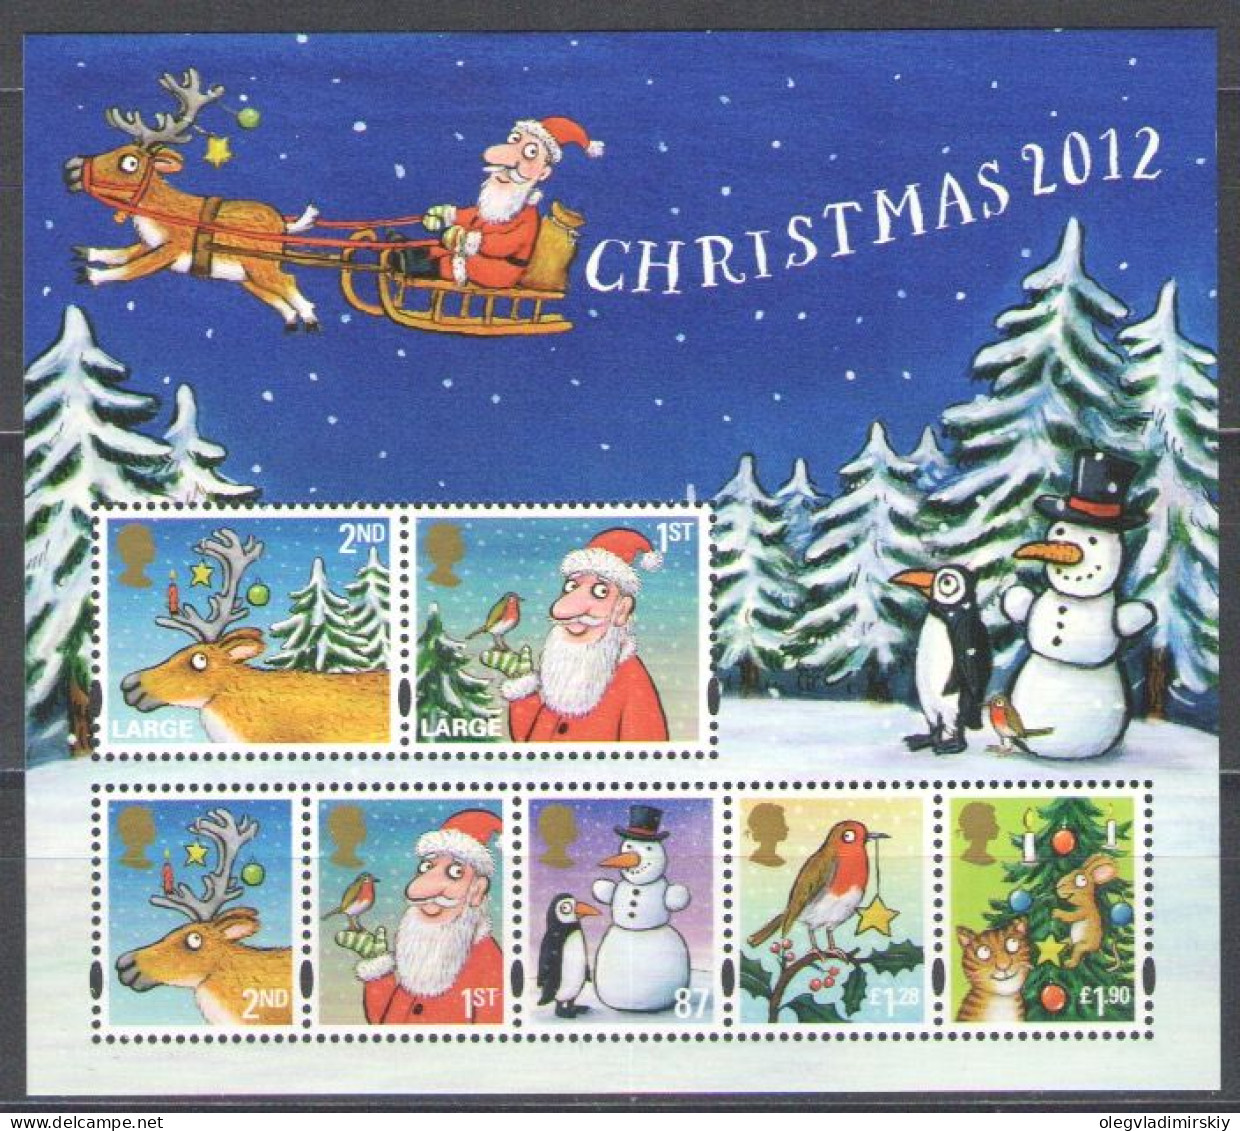 Great Britain United Kingdom 2012 Christmas Set Of 7 Classic Stamps In Block MNH - Christmas